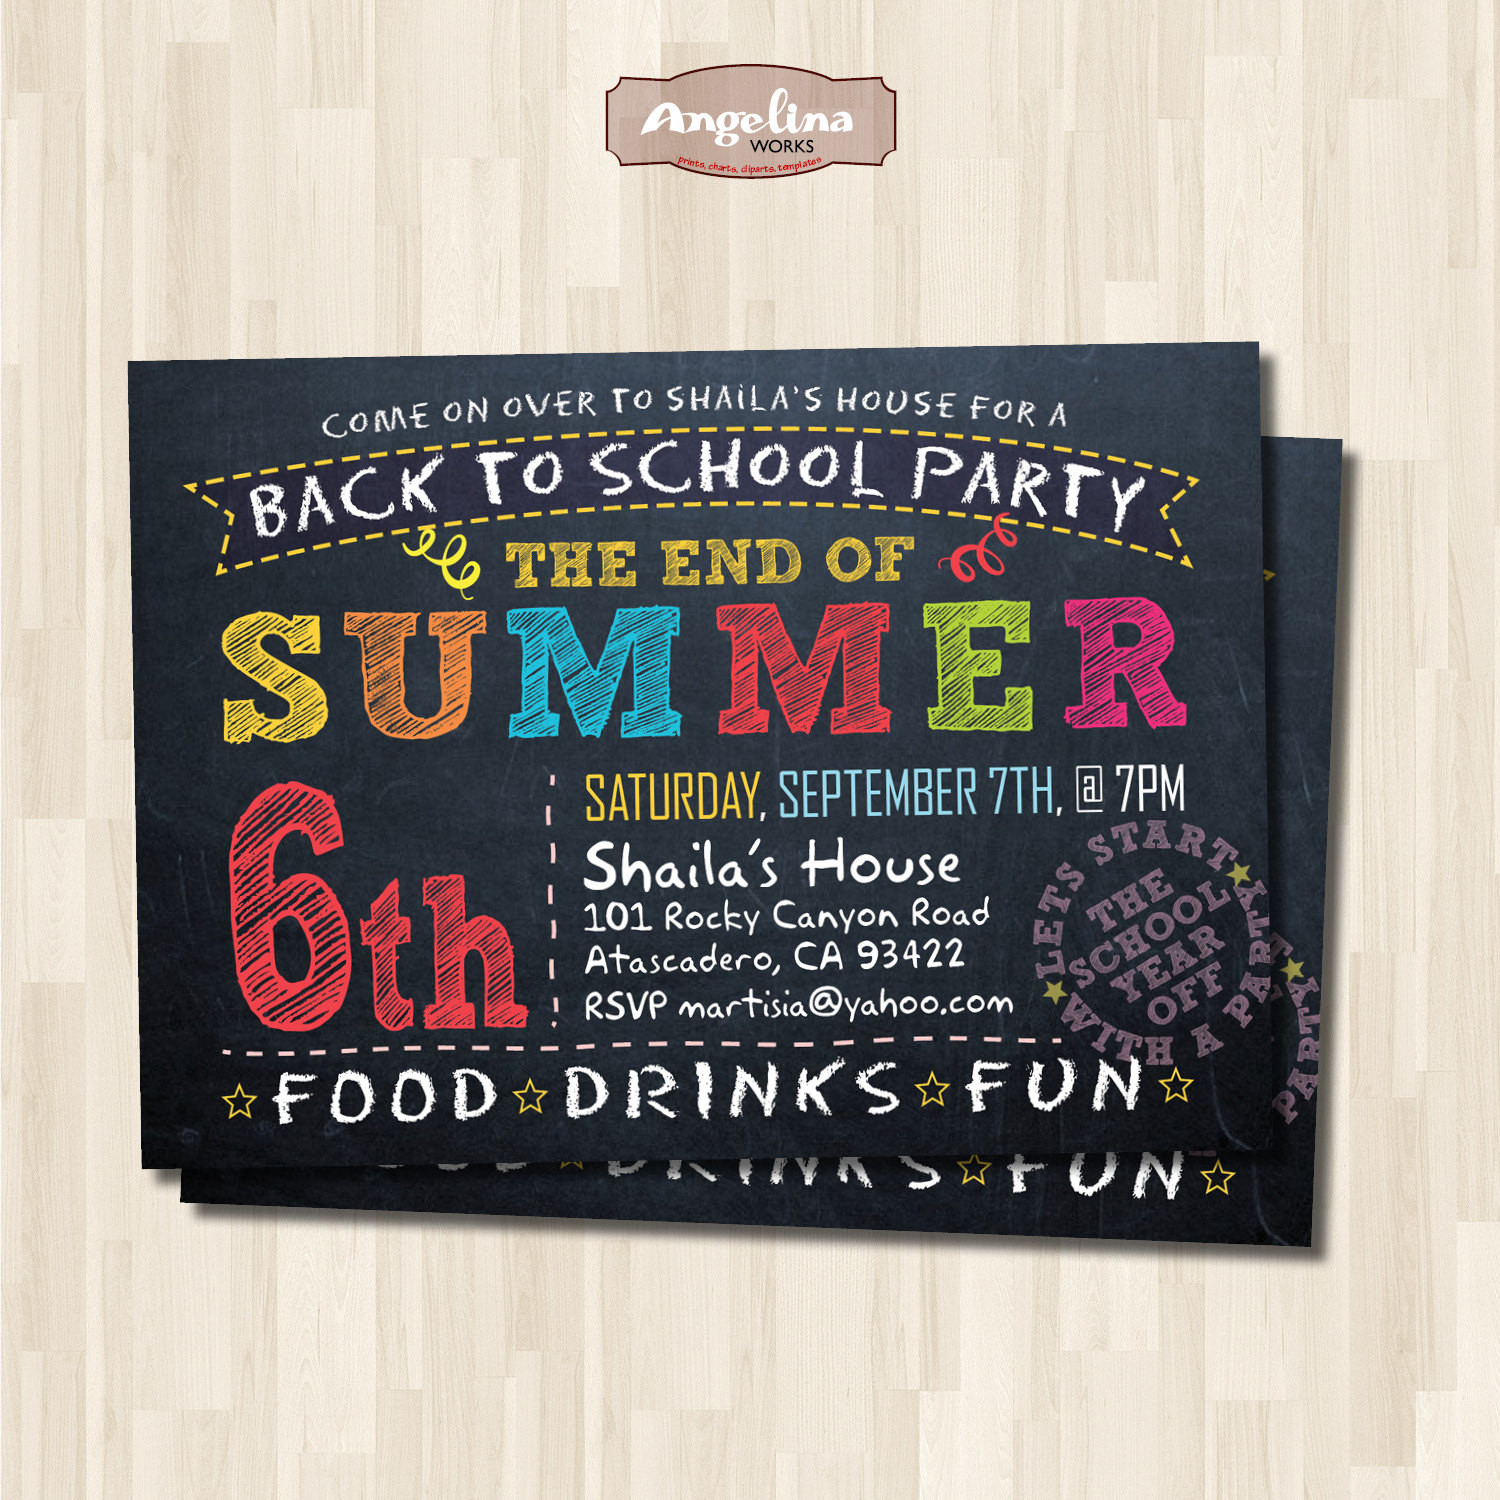 End Of Summer Party Invites
 Back to School Party Invitation End of Summer Party